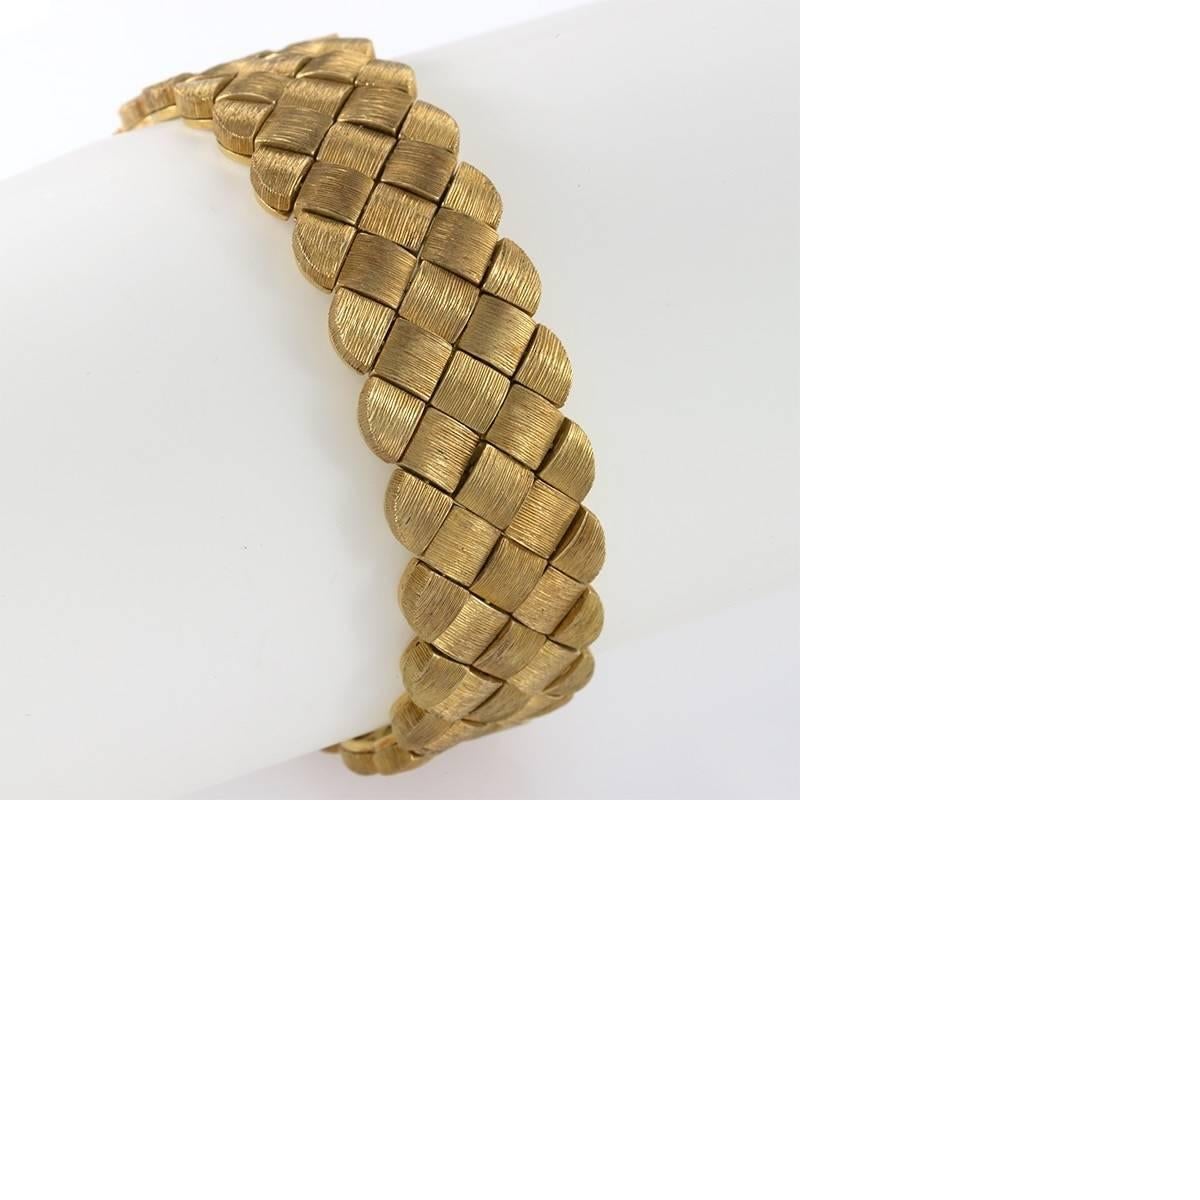 An American Late-20th Century 18 karat gold bracelet by Henry Dunay. The highly flexible bracelet is composed of a basketweave link pattern with Henry Dunay’s distinctive surface texturing and unique gold color. Unique Dunay slide clasp. Circa